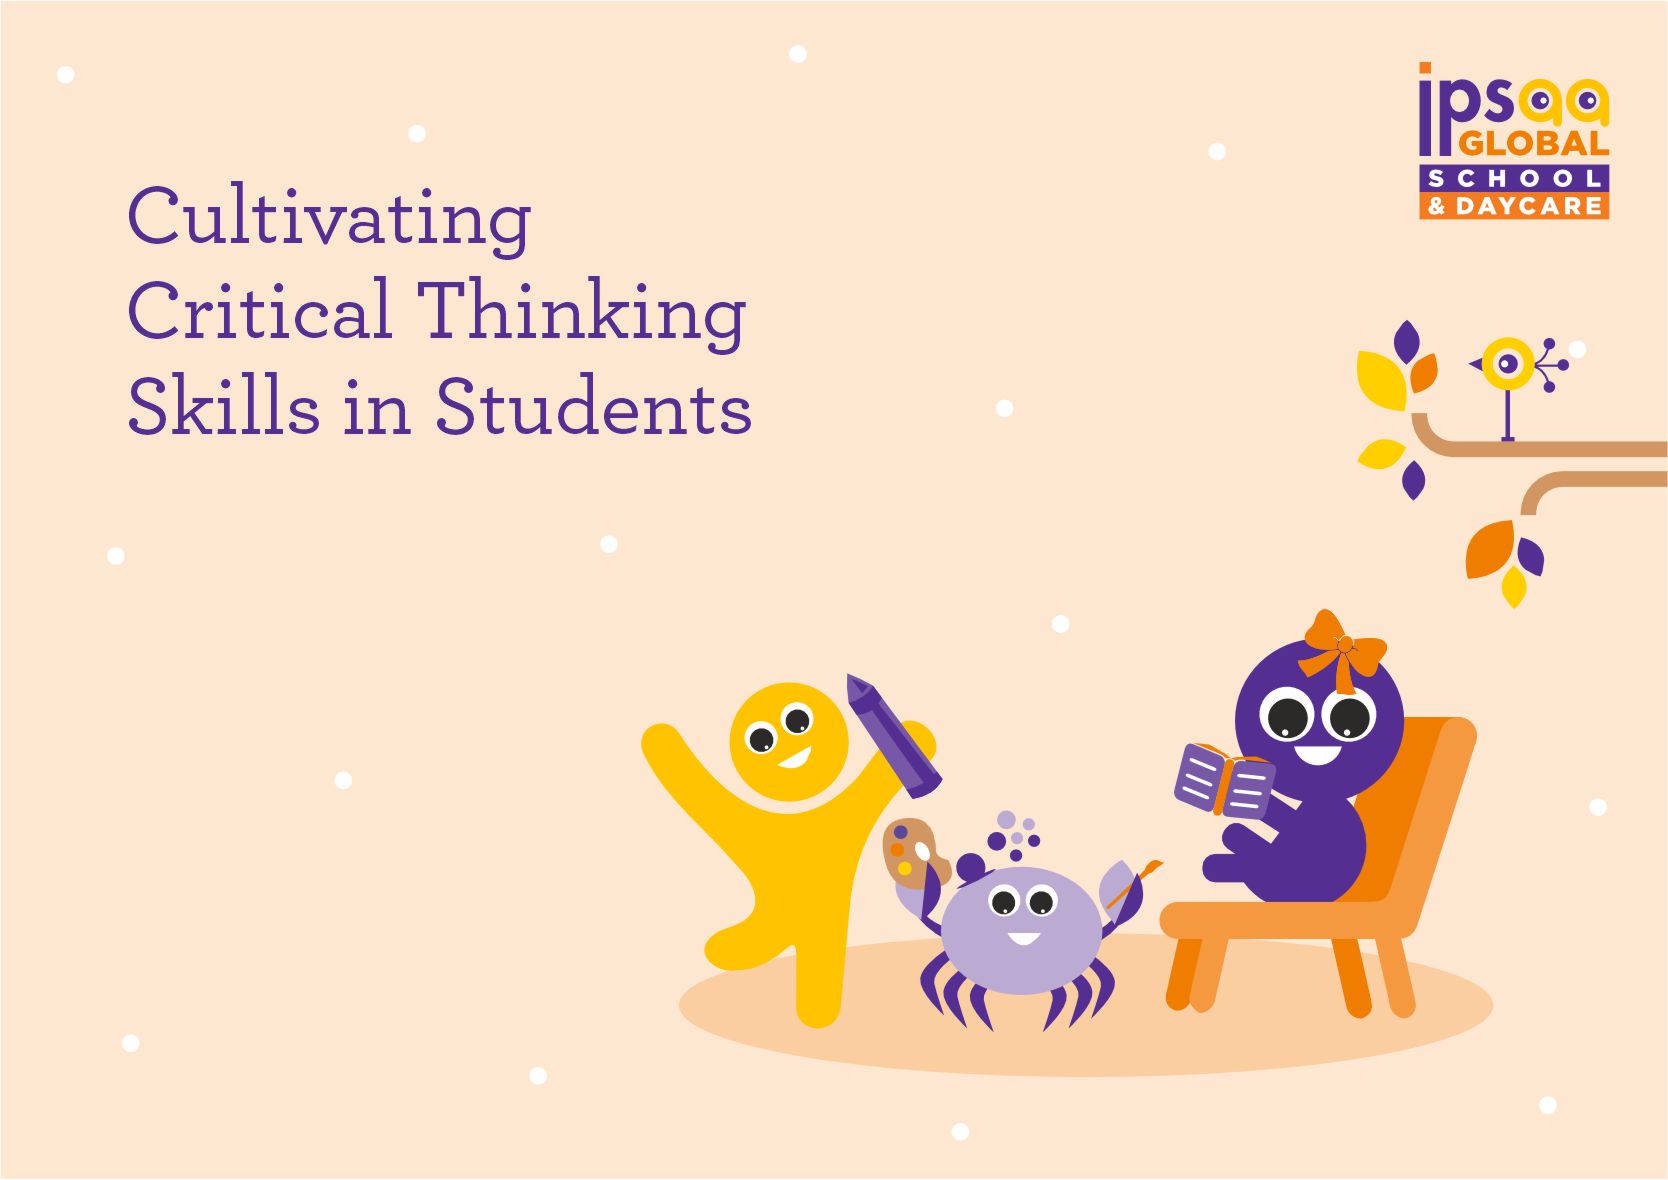 Cultivating Critical Thinking Skills in Students